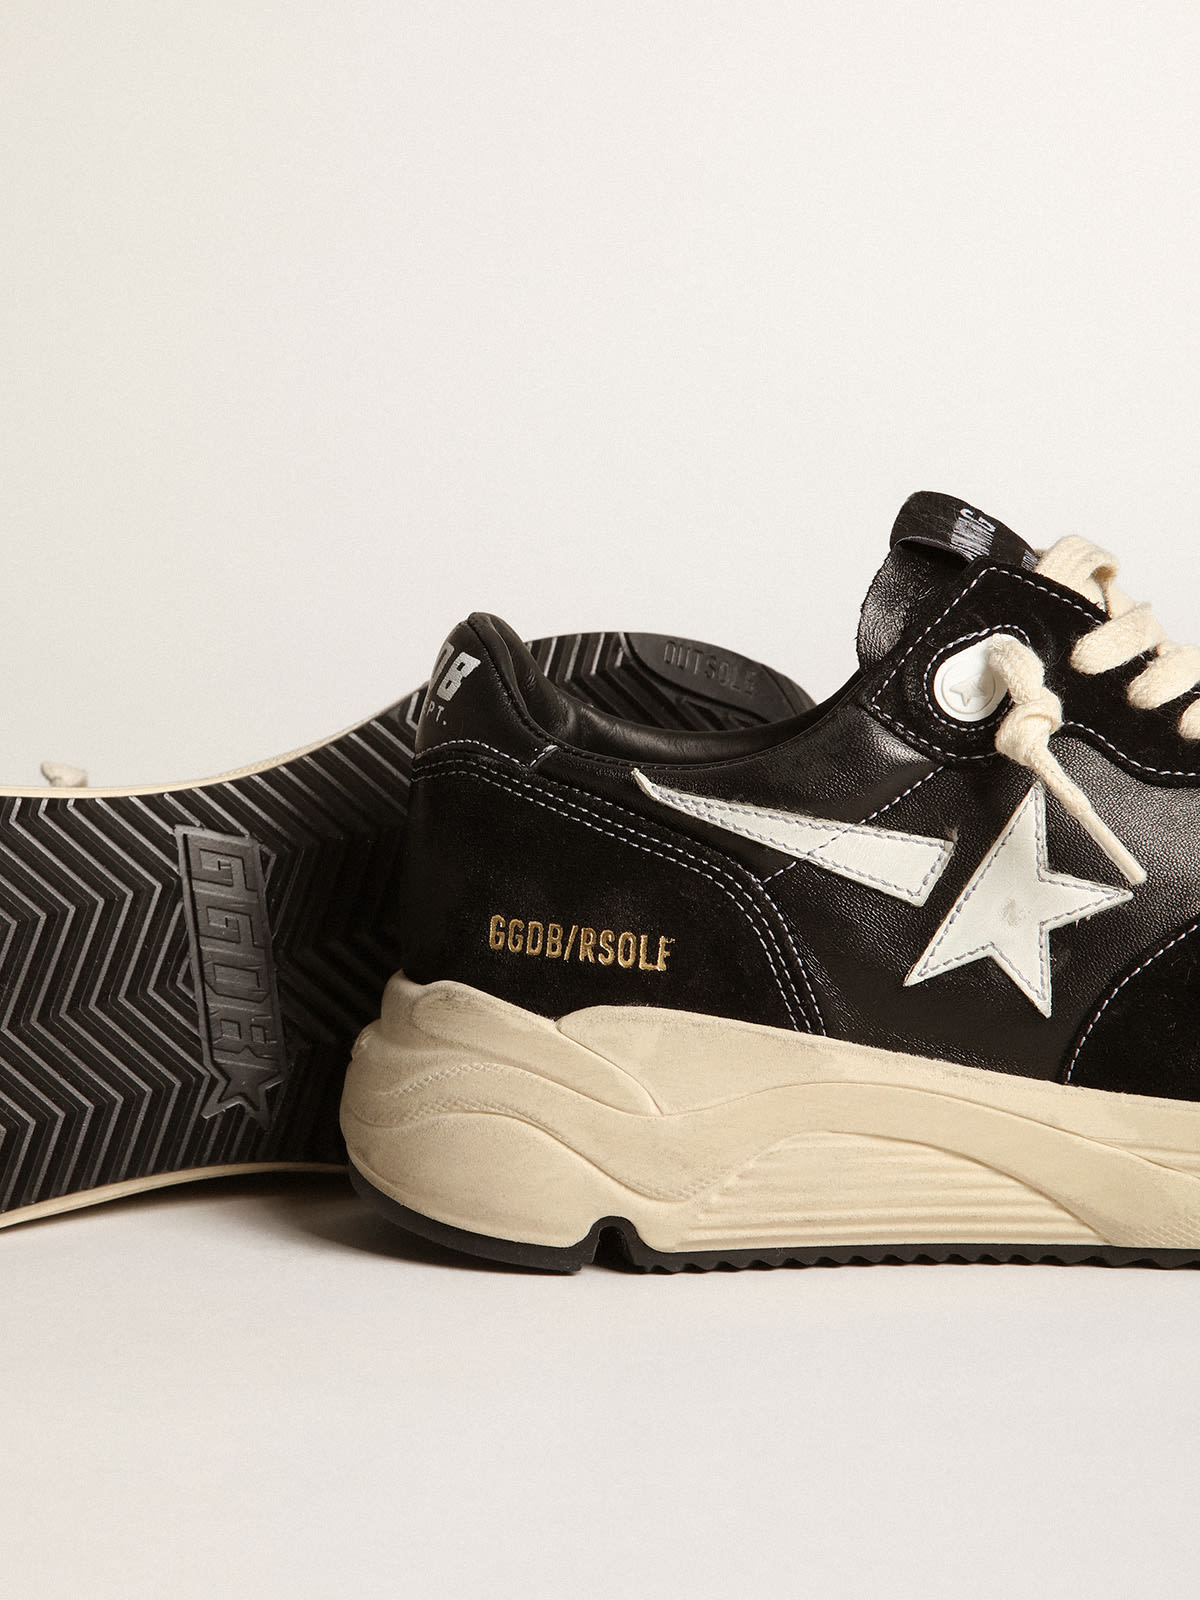 Golden Goose - Men’s Running Sole in black nappa leather and suede with a white star in 